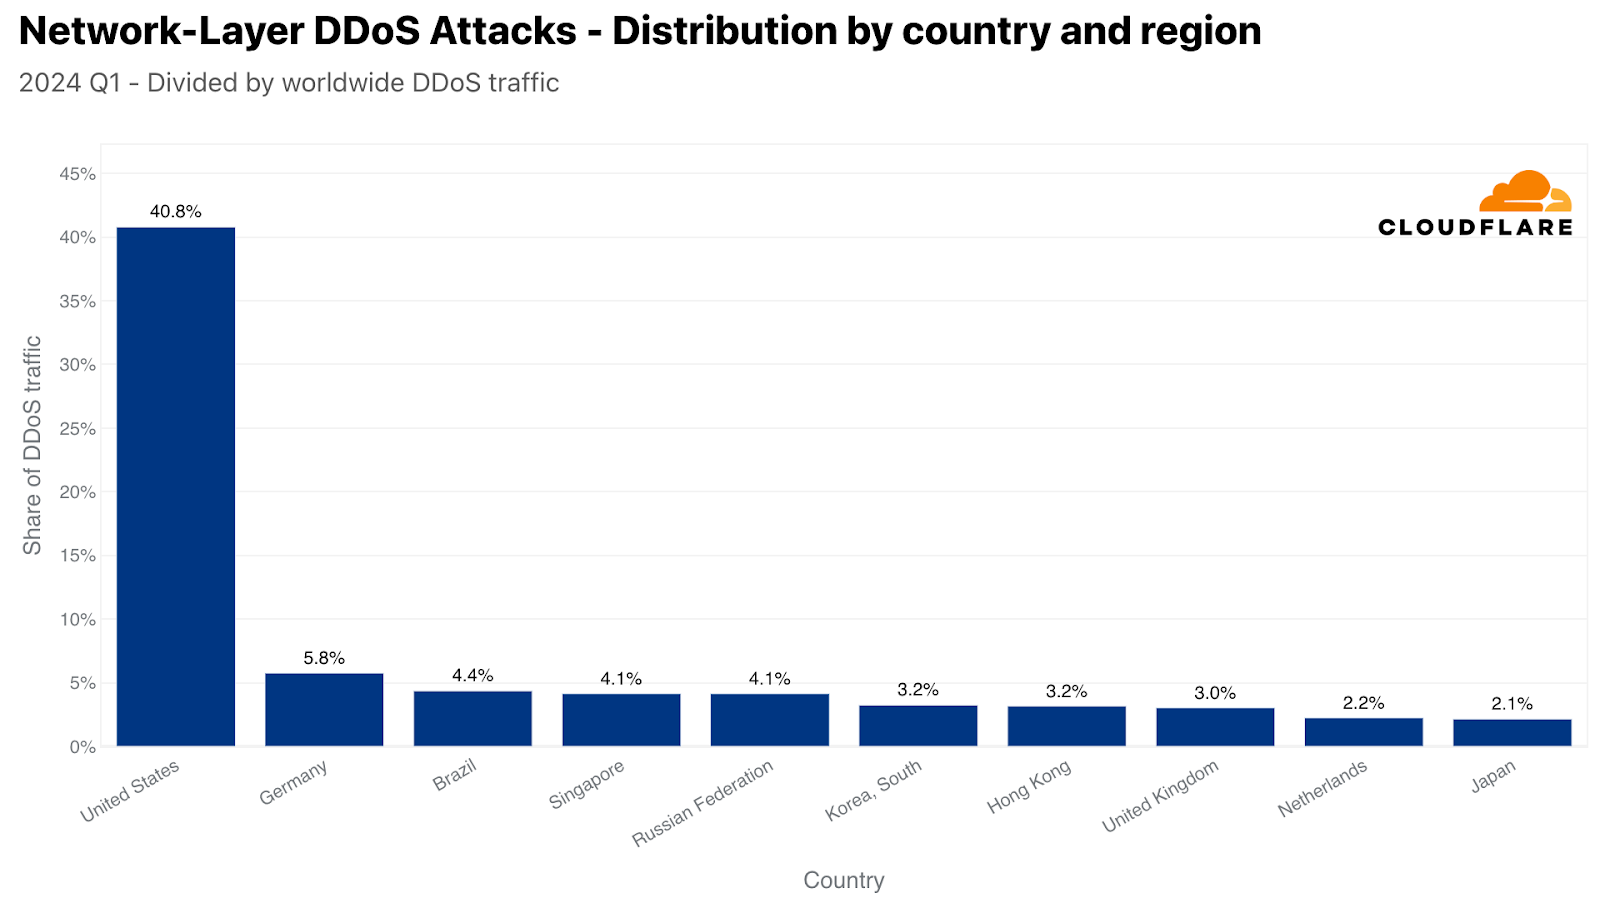 The top sources of L3/4 DDoS attacks